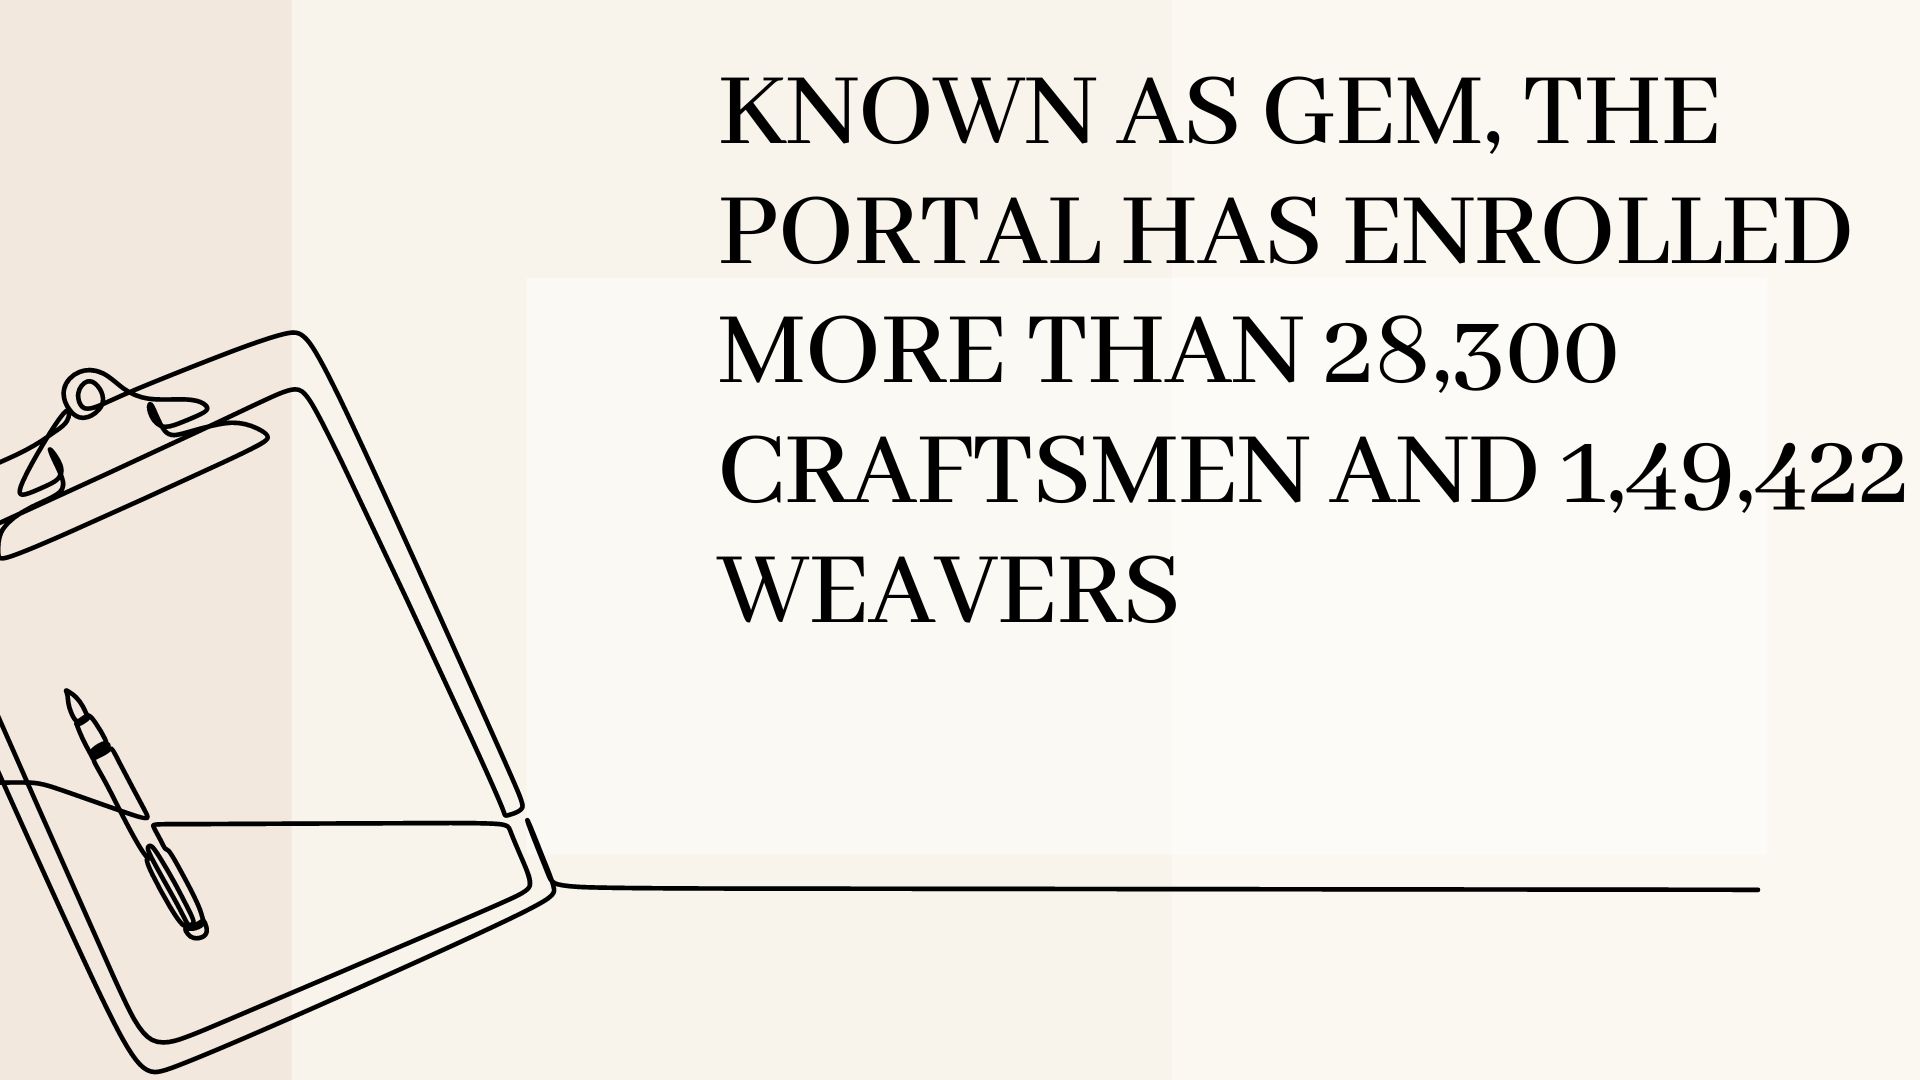 Known as GeM, the portal has enrolled more than 28,300 craftsmen and 1,49,422 weavers (1)